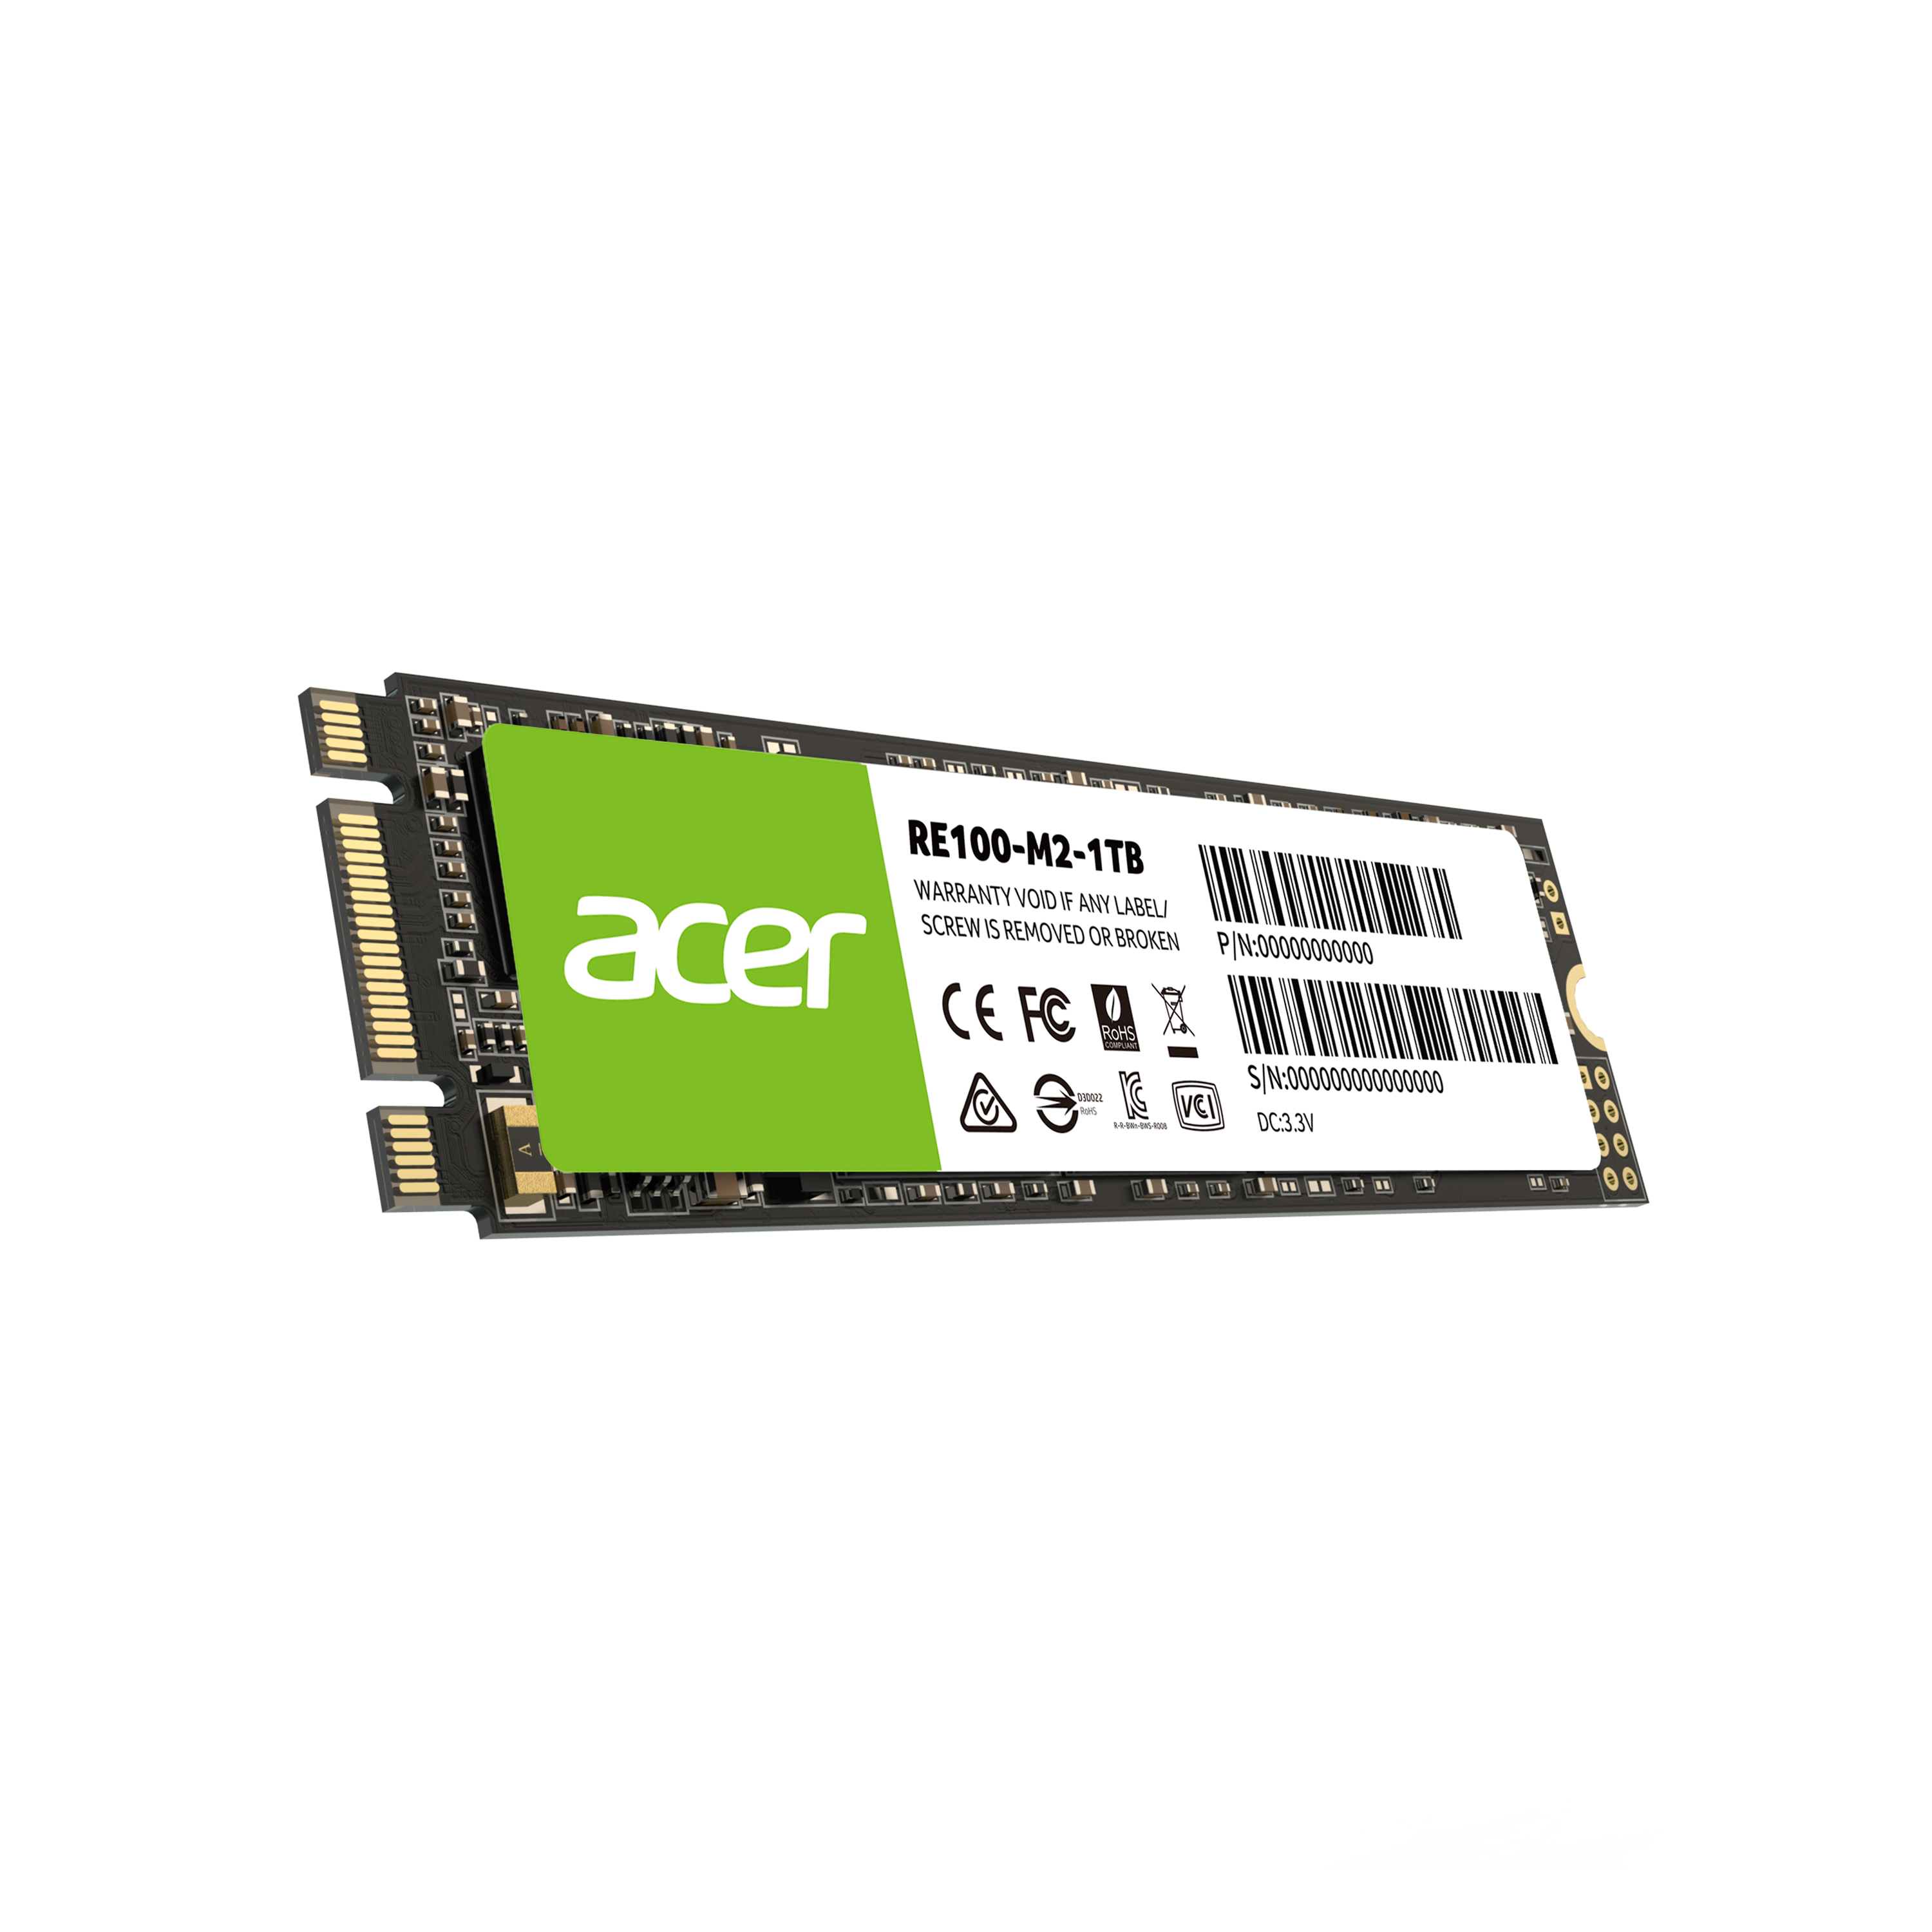 Acer RE100 M.2 SSD max. sequential read speed of up to 560 MB/s